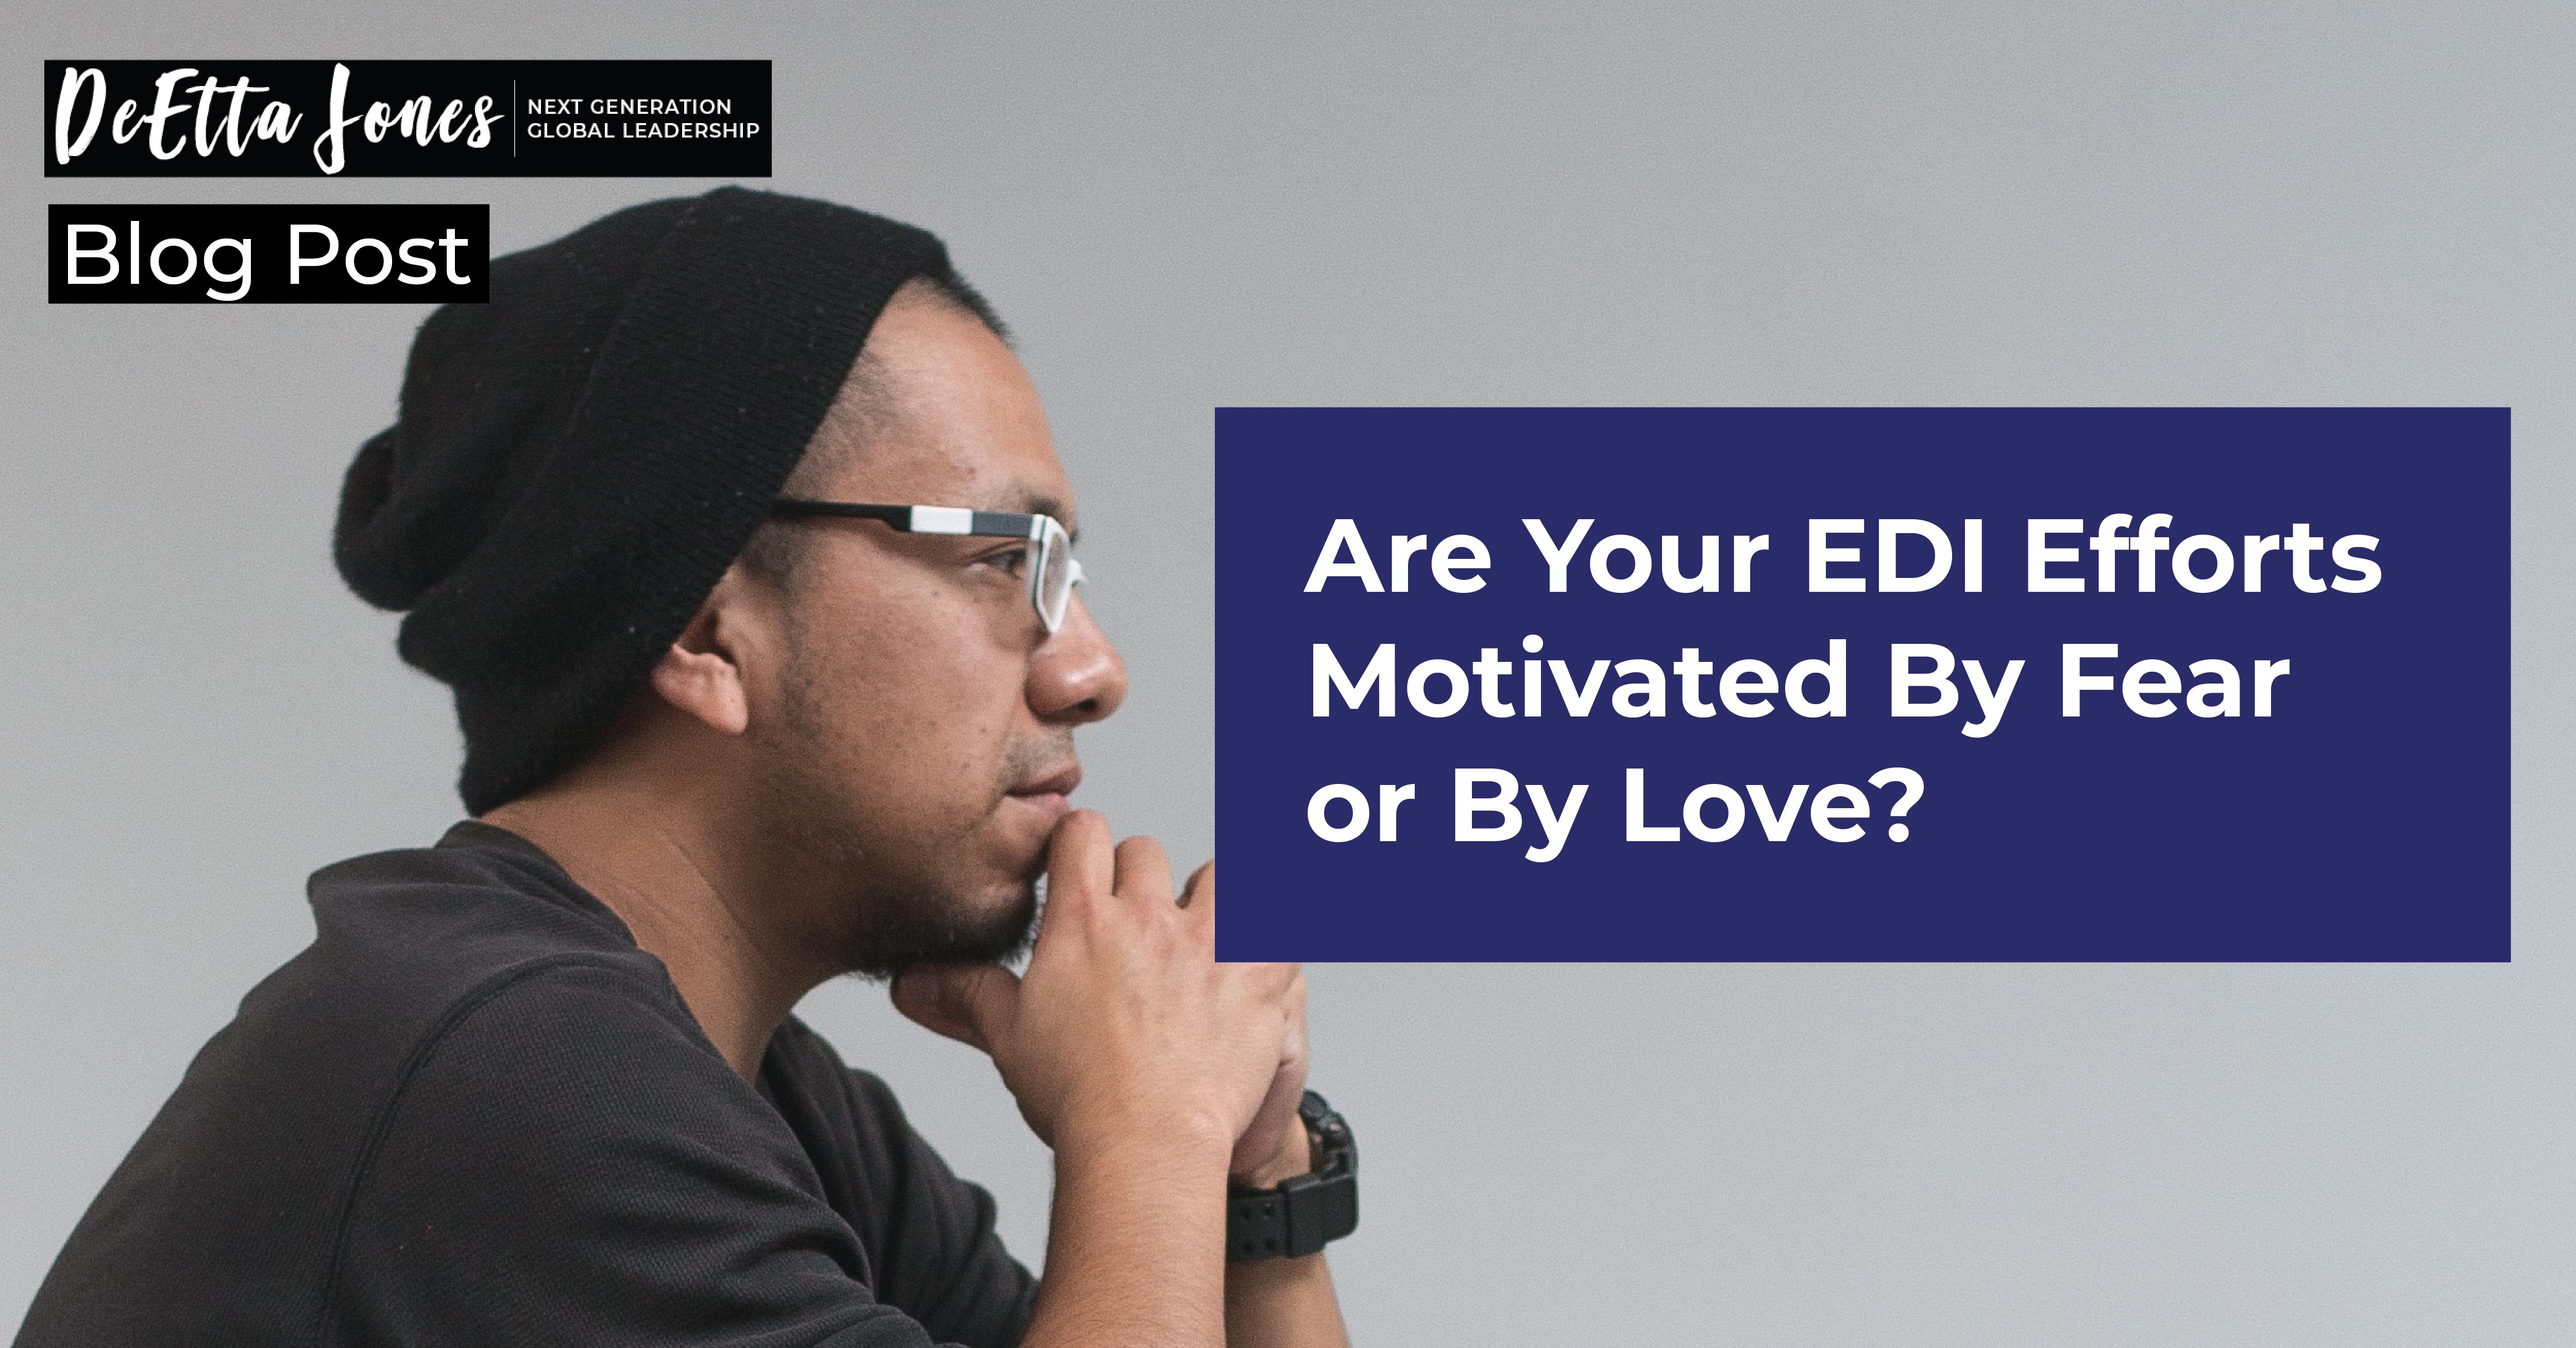 Are Your EDI Efforts Motivated By Fear or By Love?